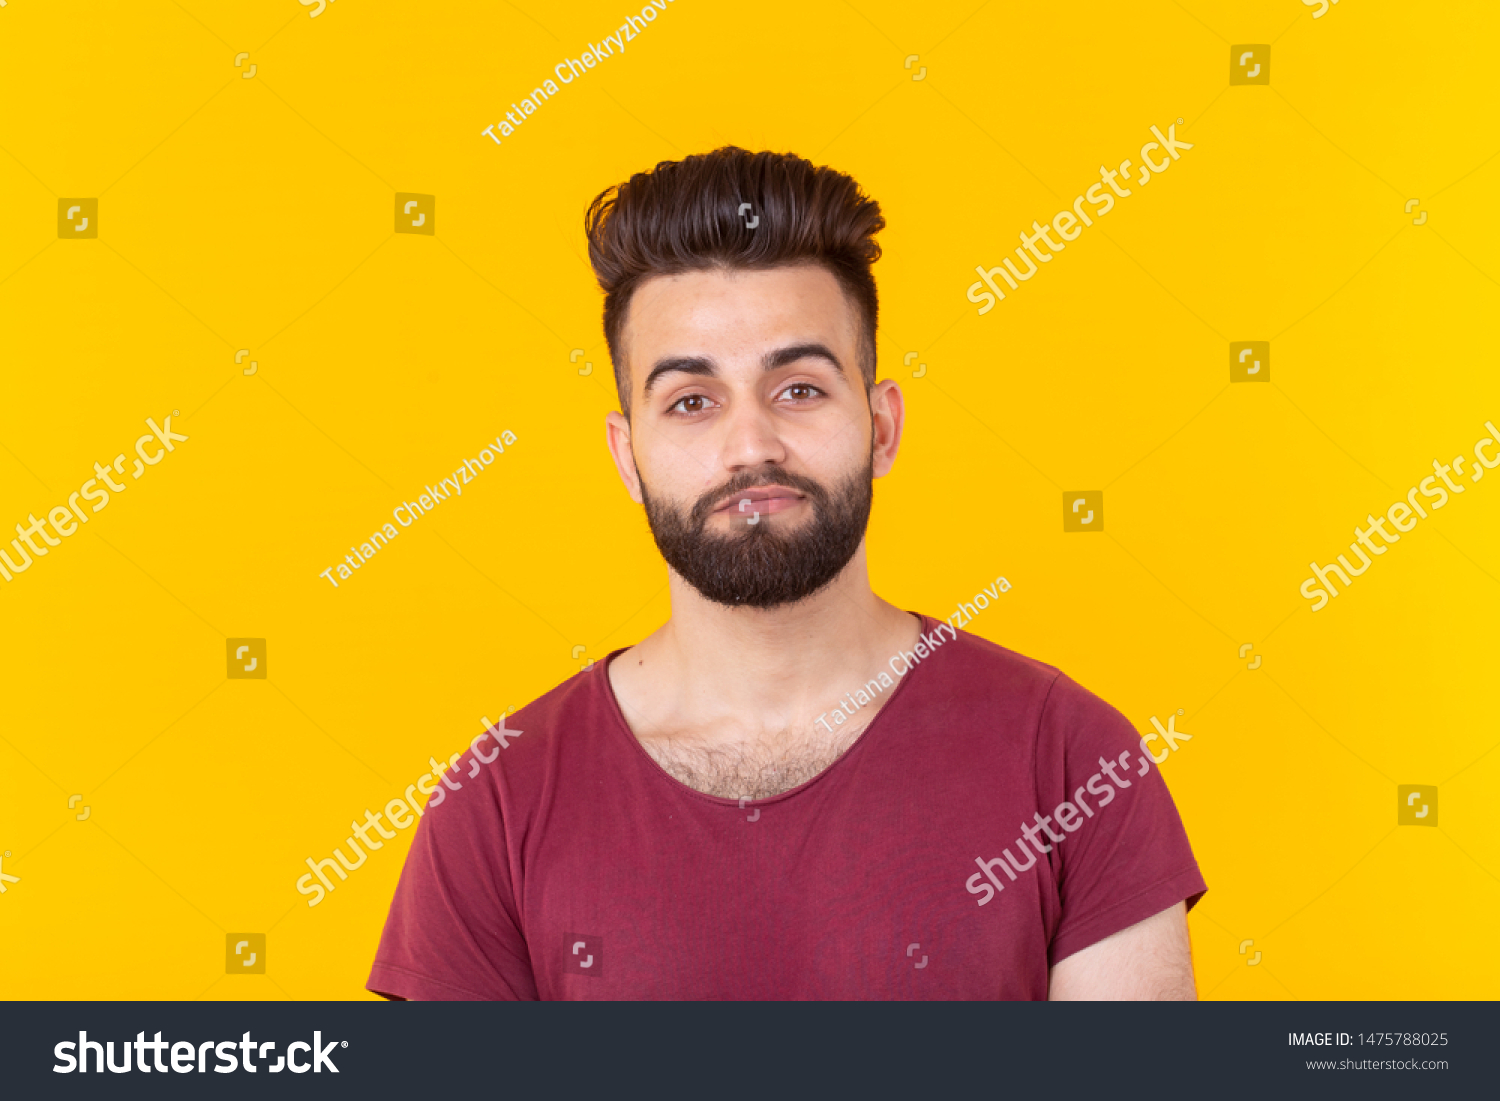 East asian handsome man wearing red tshirt on yellow background #1475788025